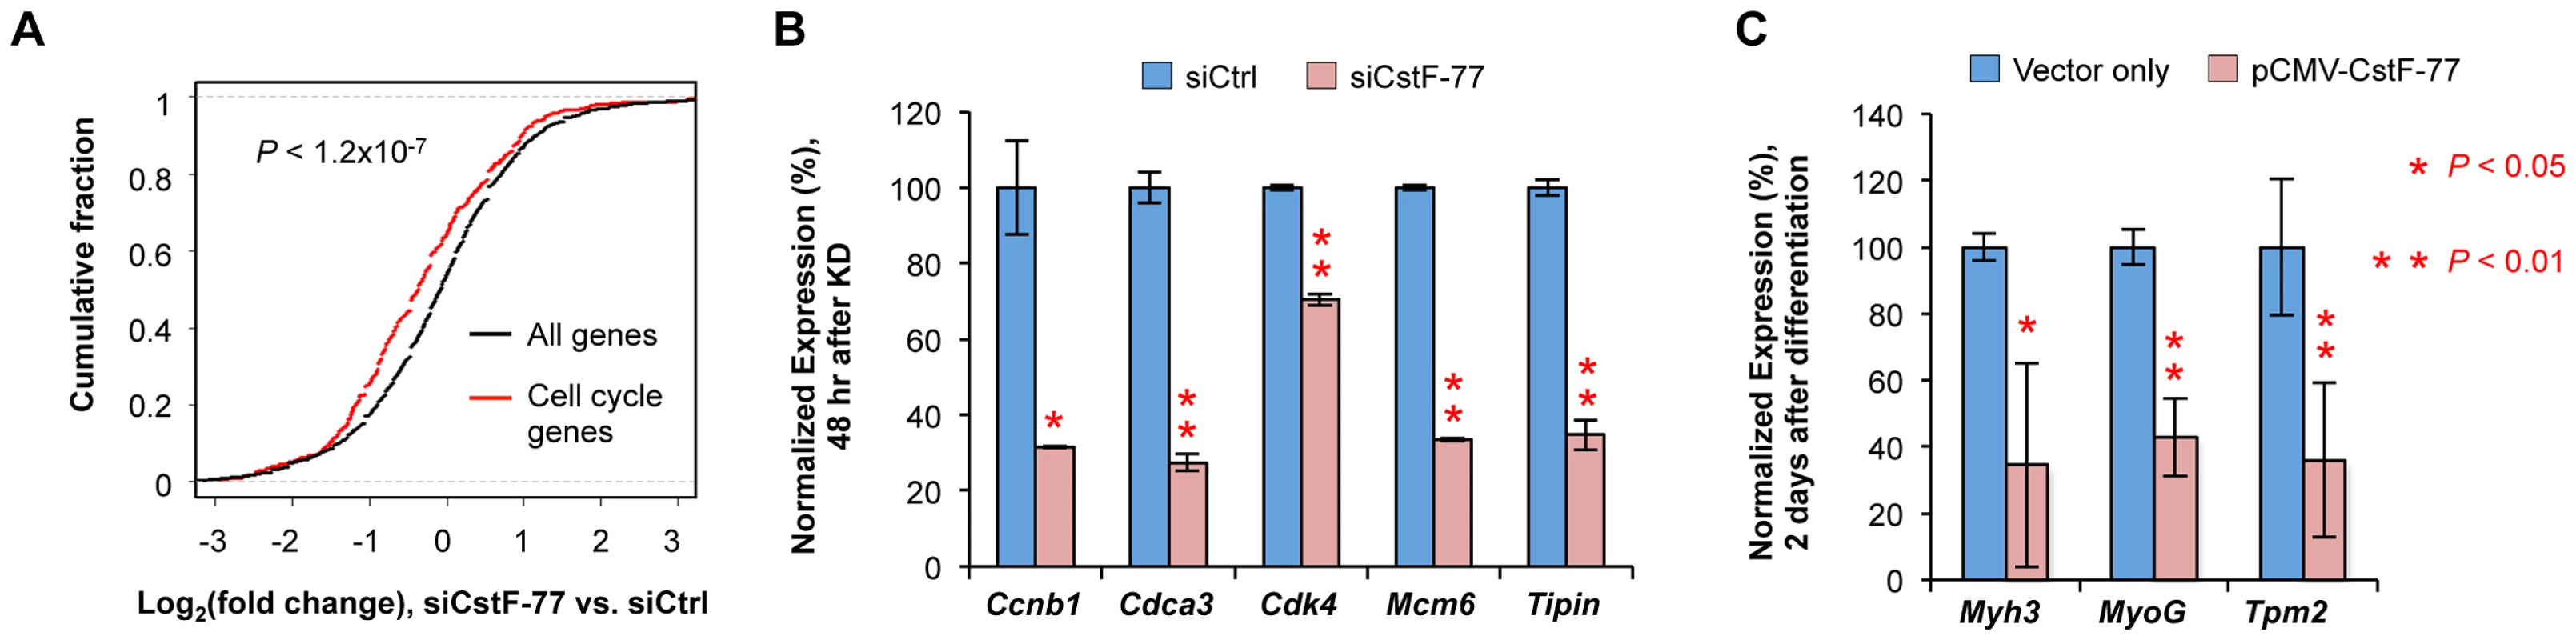 Cell cycle genes are affected by CstF-77 knockdown.